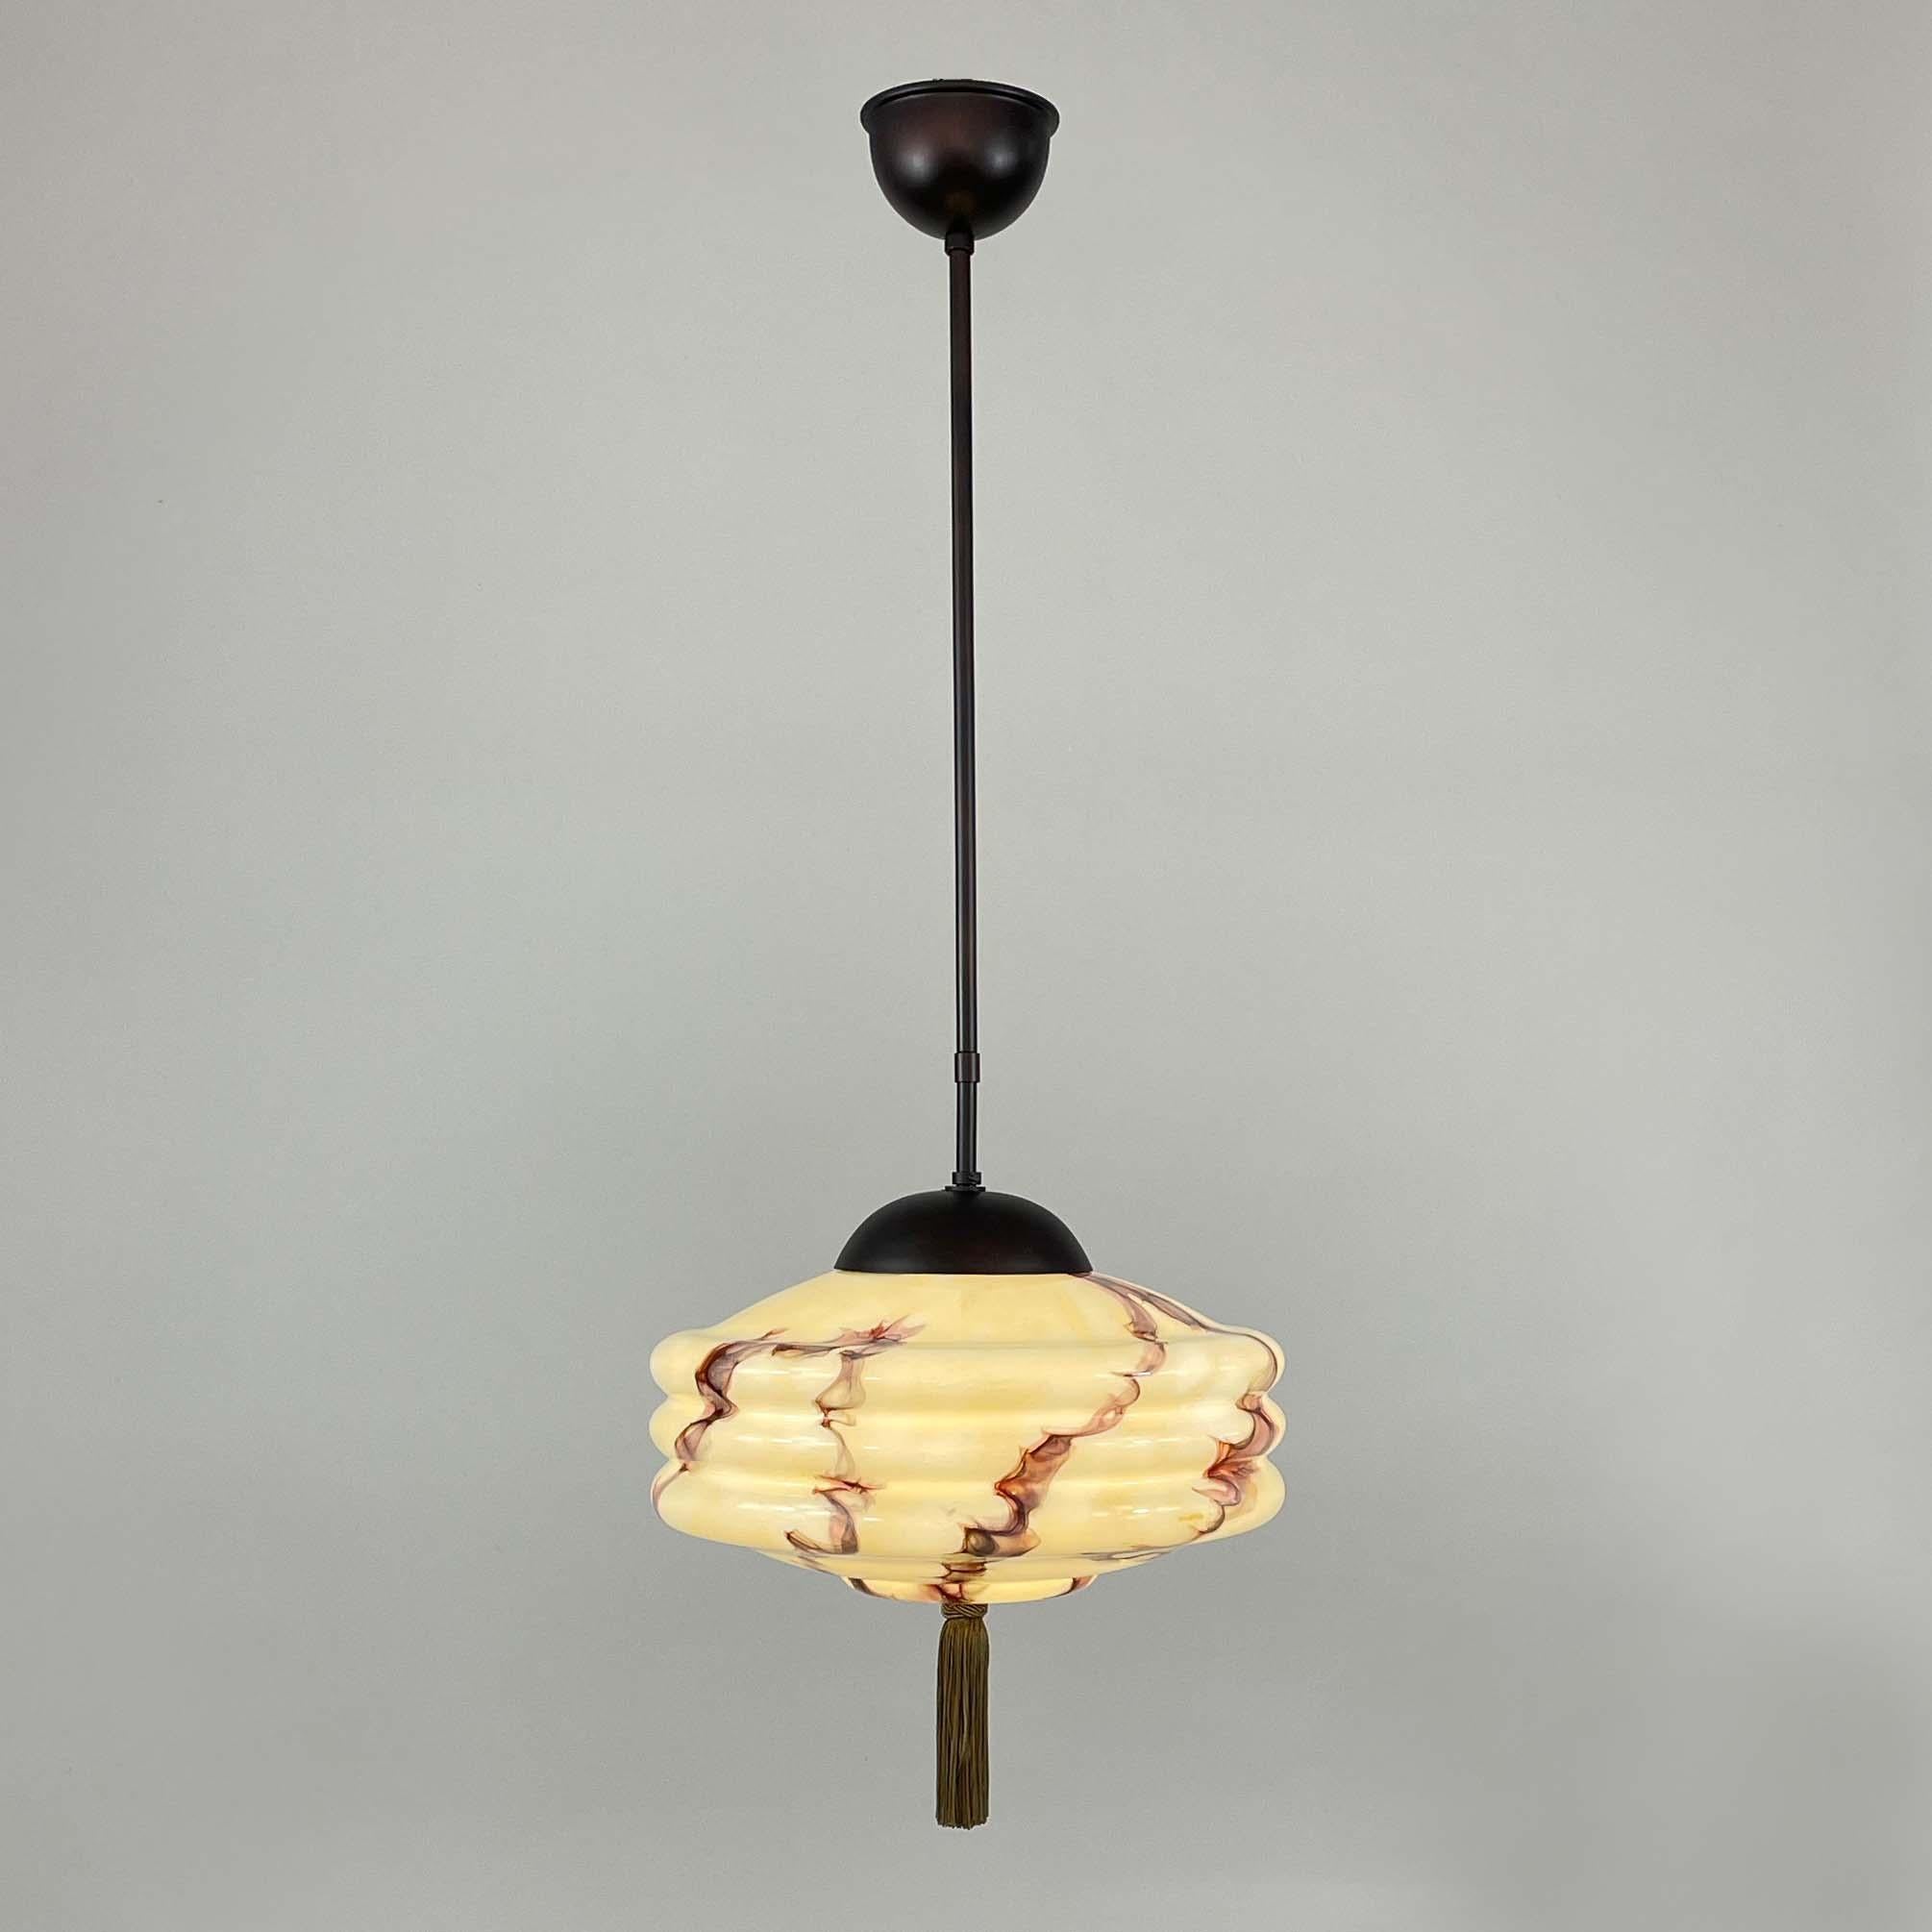 Mid-20th Century German Art Deco Marbled Opaline Glass & Bronzed Brass Pendant, 1920s to 1930s